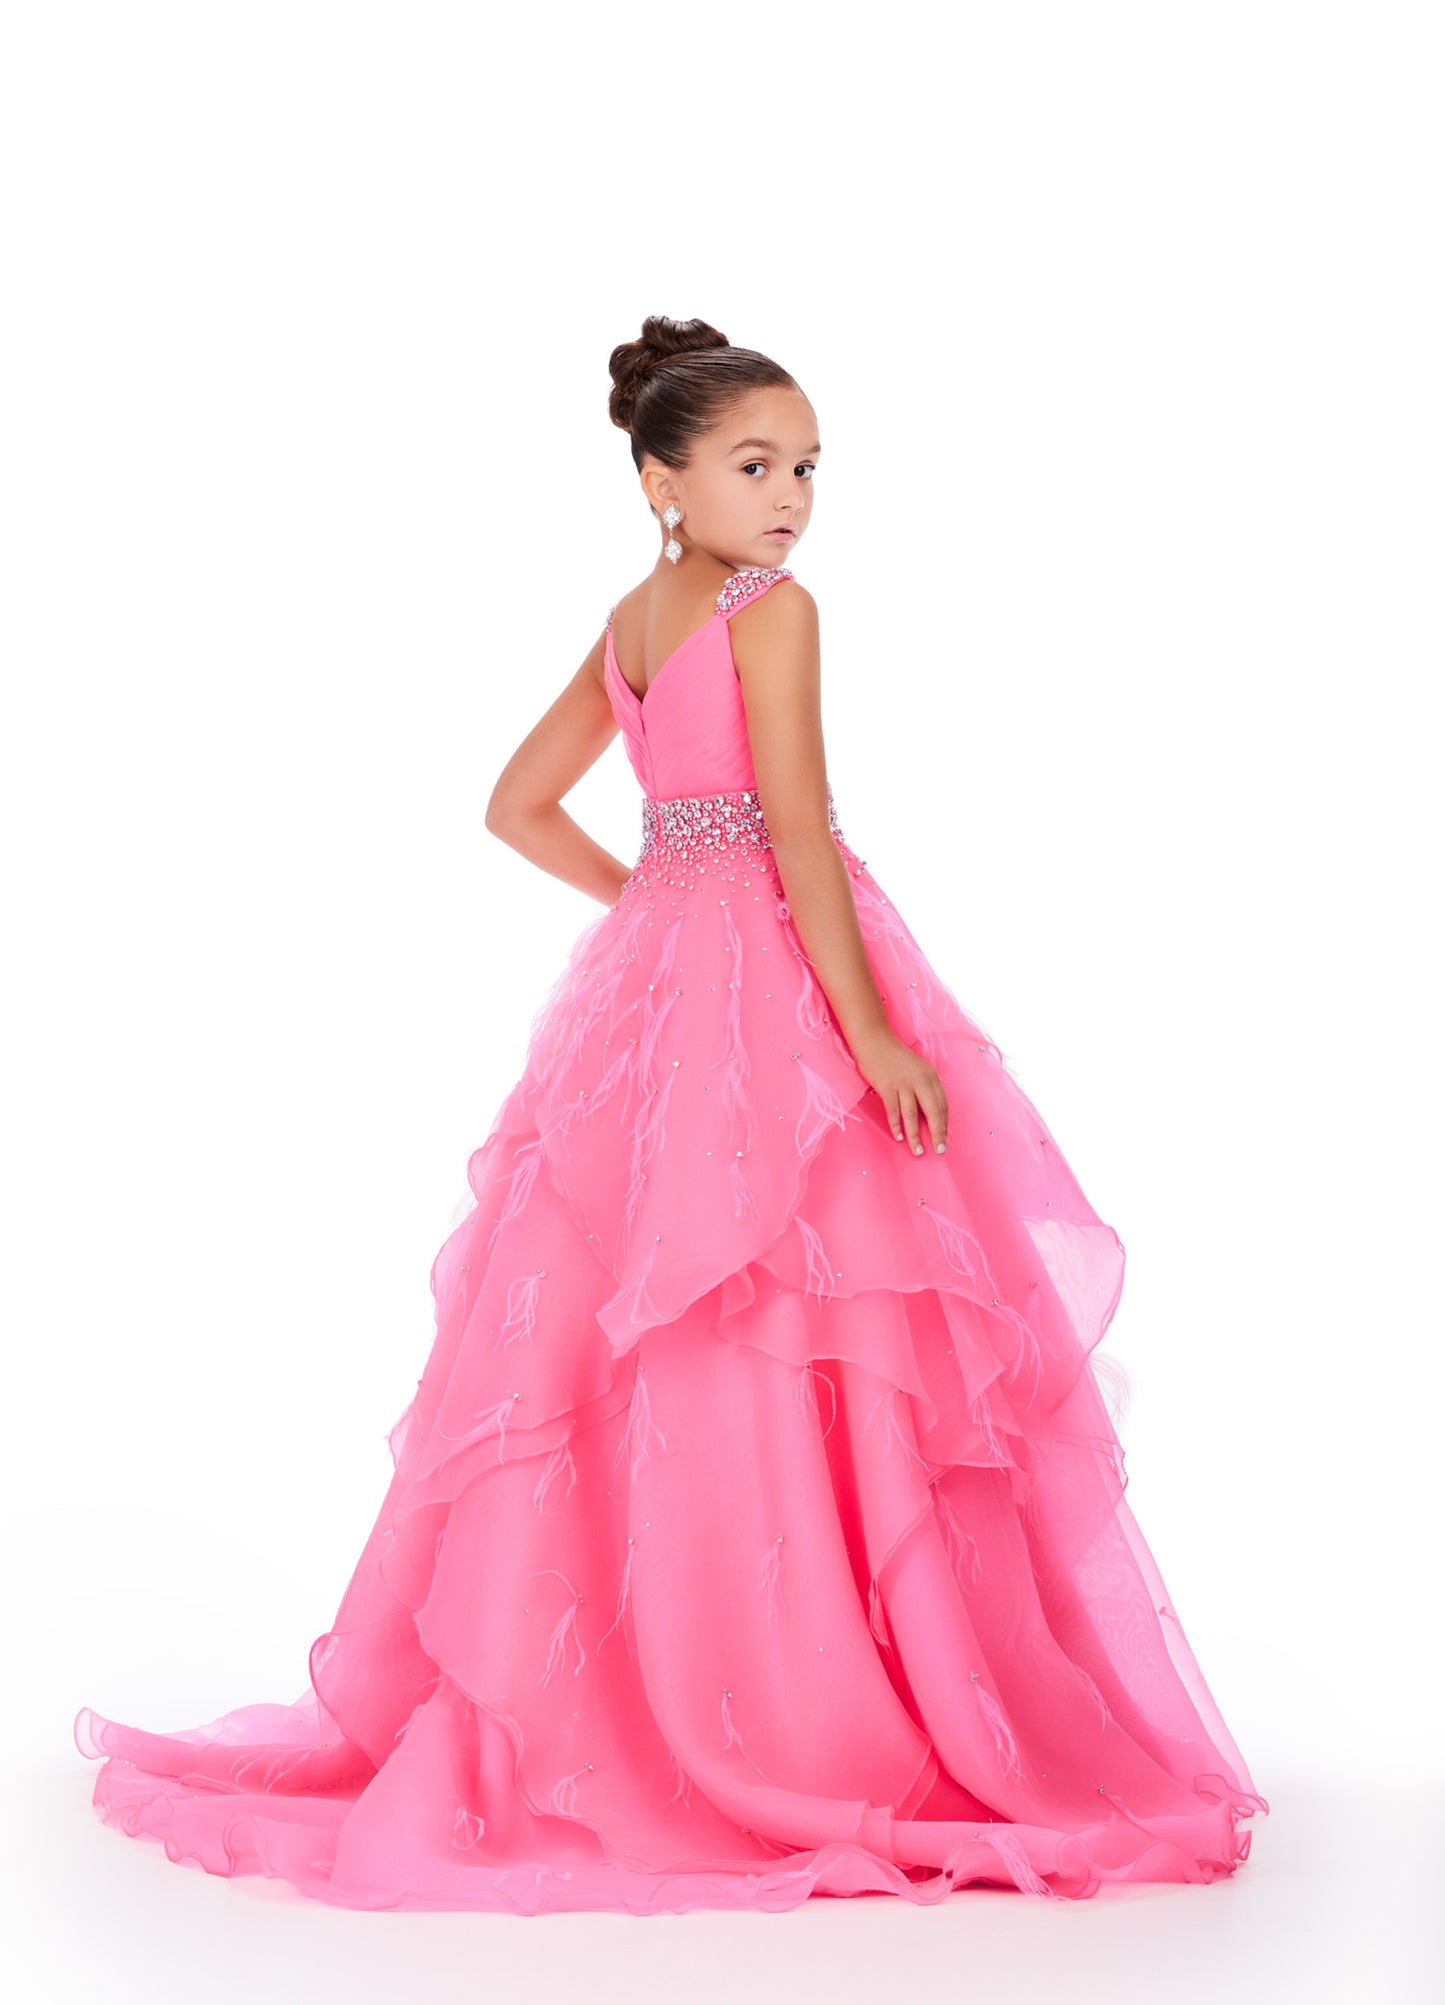 Elevate your little one's pageant look with the Ashley Lauren Kids 8219 Girls Layered Feather Pageant Dress. This stunning ballgown features a V-neck embellished with feathers, adding a touch of glamour to the overall design. With its layered skirt, this dress will make your child feel like a princess on stage. Be the star of the show in this fabulous organza ball gown